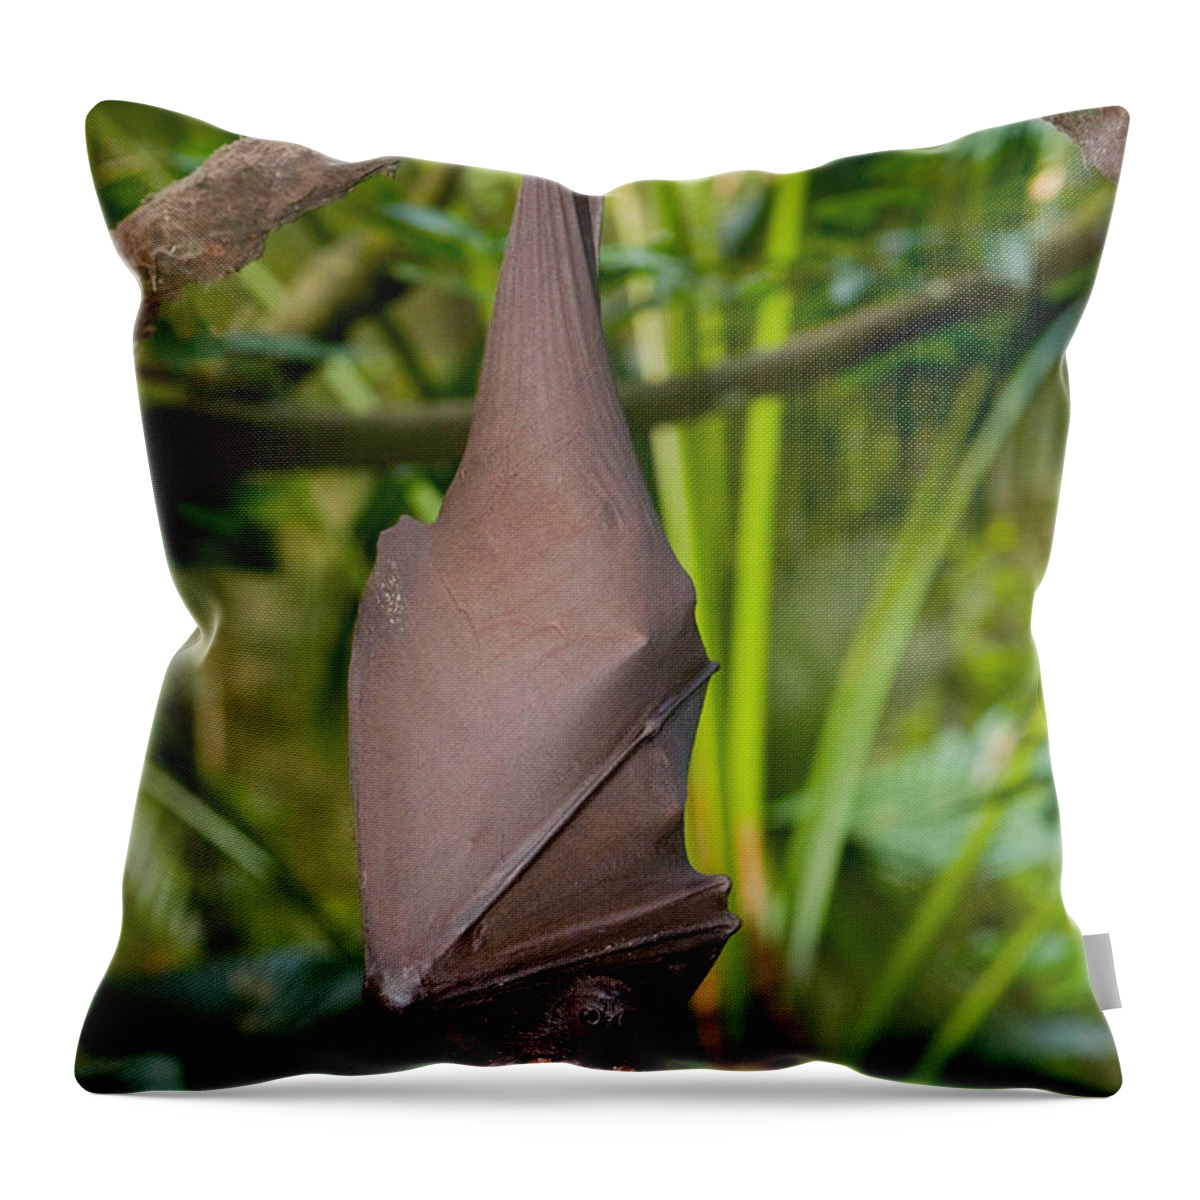 Animal Throw Pillow featuring the photograph Malayan Flying Fox by B. G. Thomson